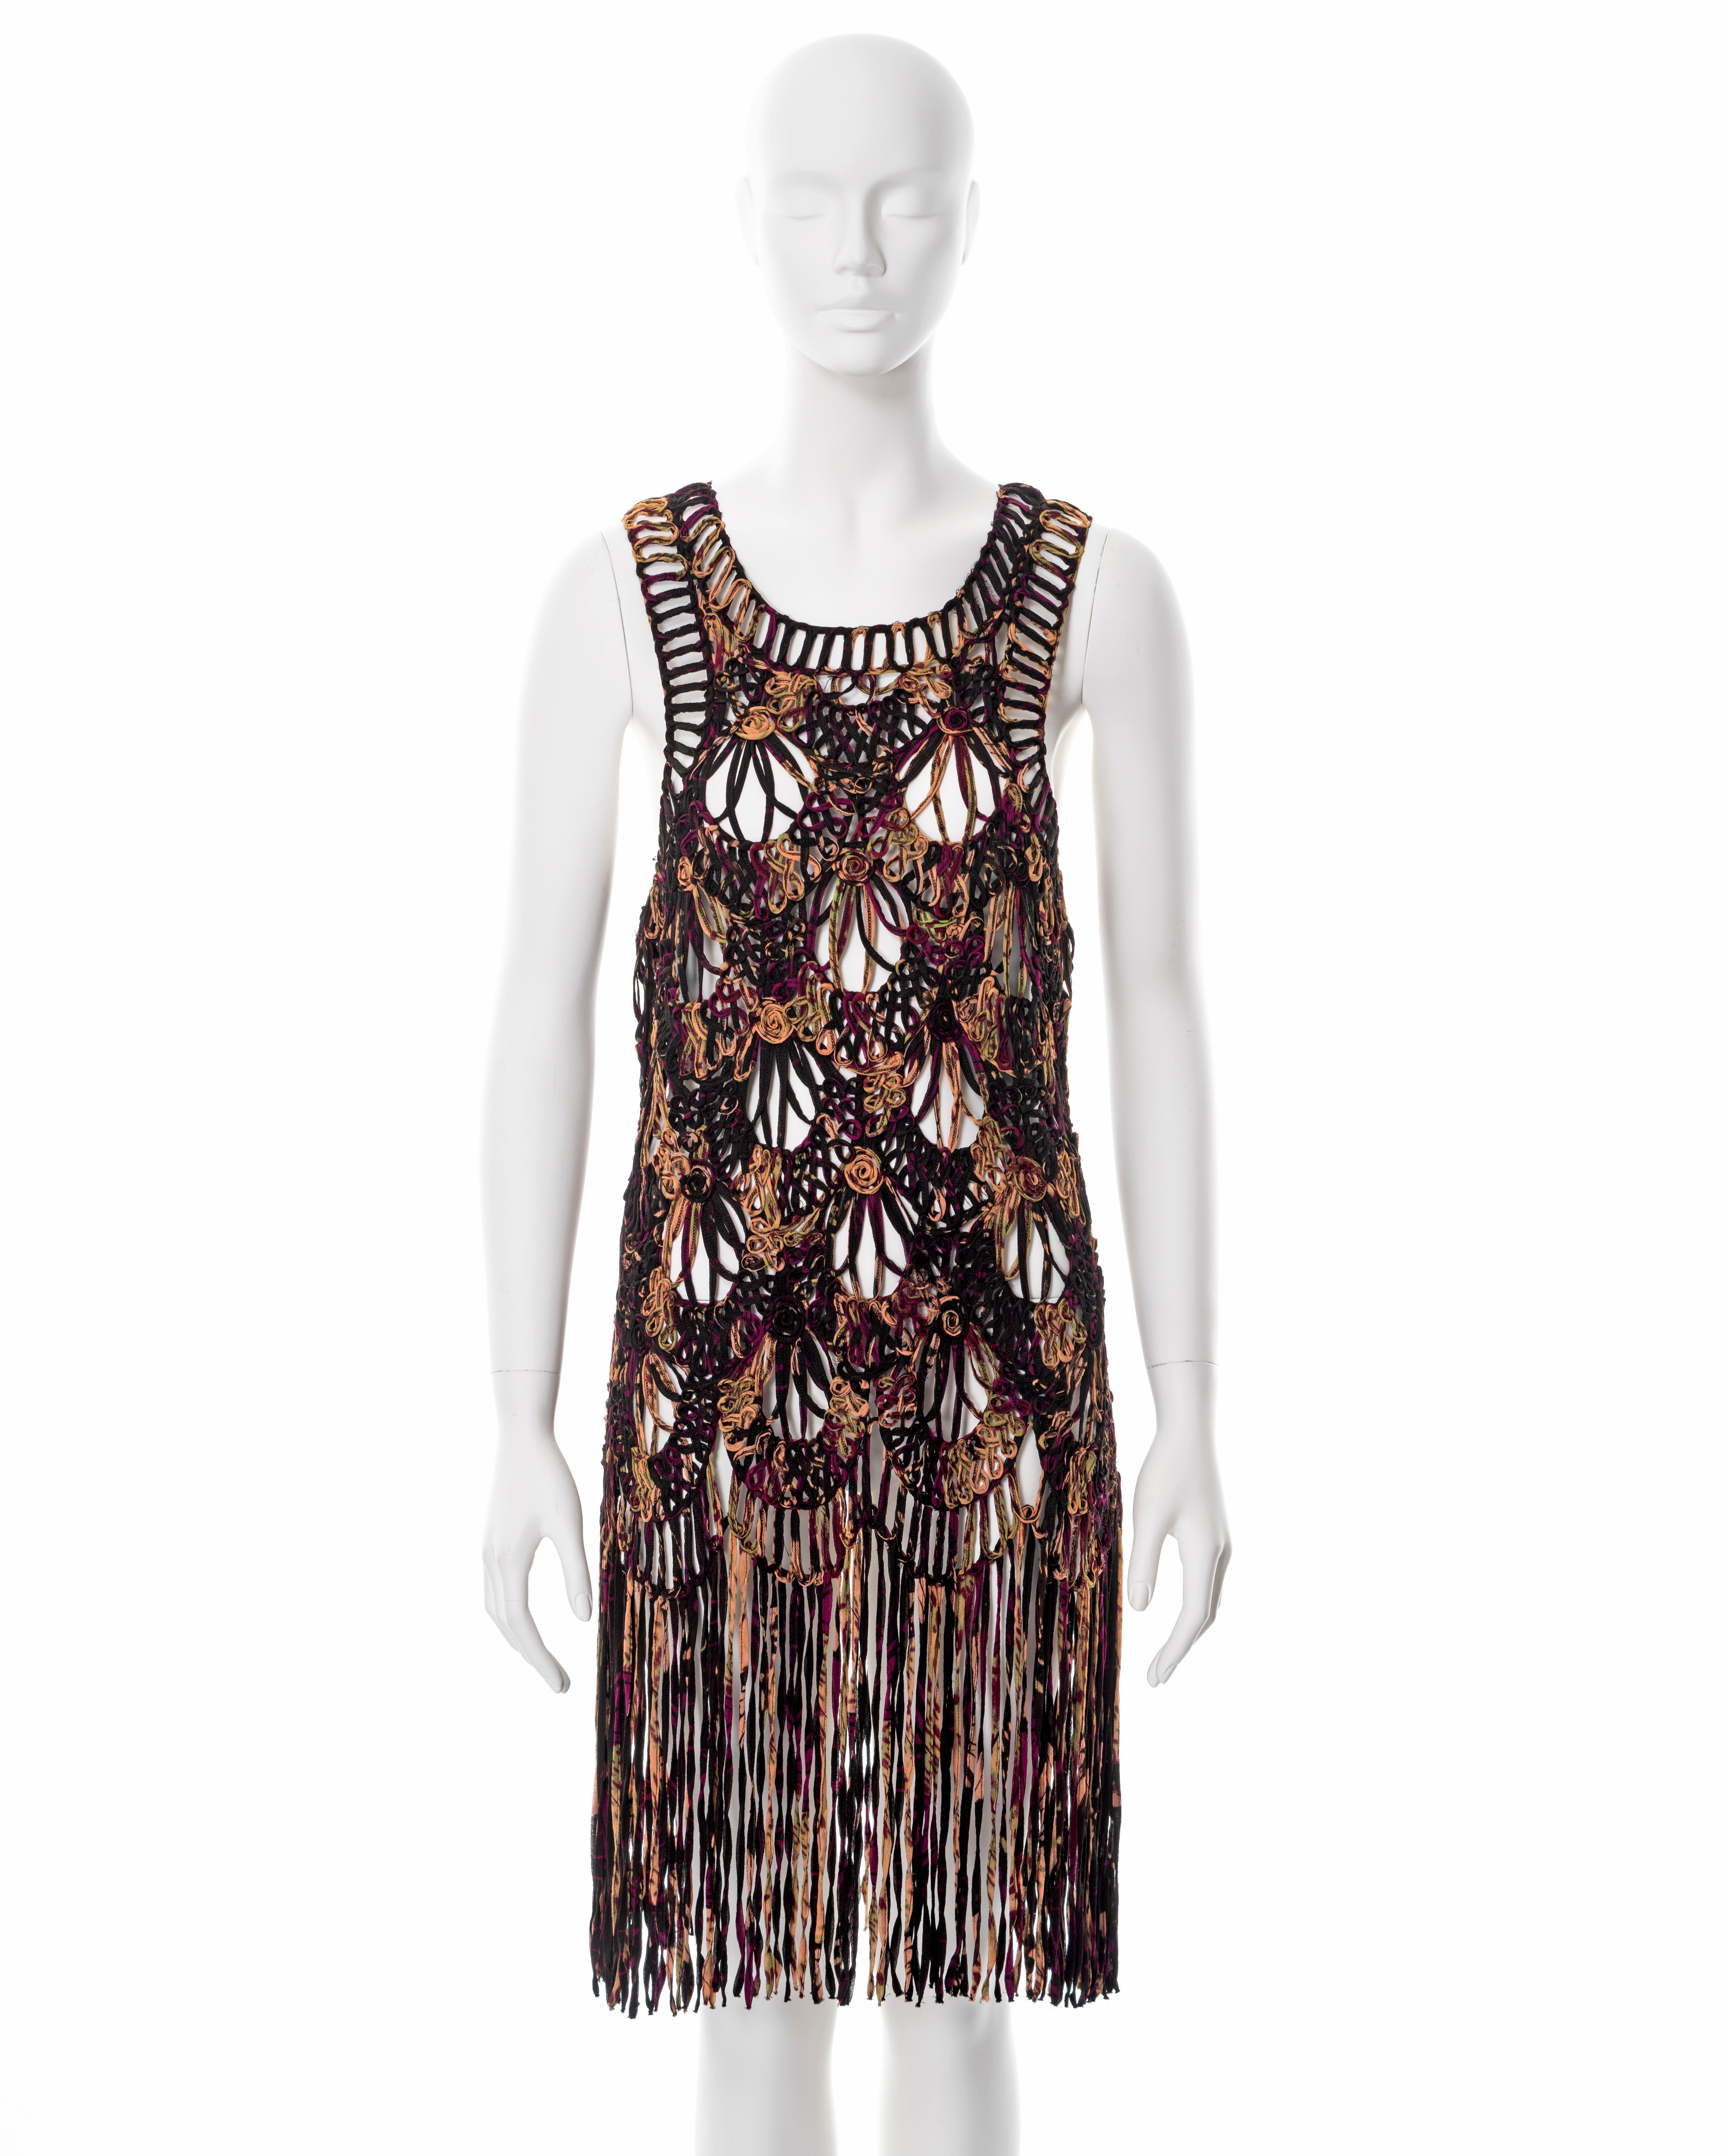 ▪ Jean Paul Gaultier silk macramé dress
▪ Sold by One of a Kind Archive
▪ Spring-Summer 2000
▪ Constructed from multicoloured printed silk ribbons 
▪ Fringed knee-length skirt 
▪ Loose fit
▪ Size Medium 
▪ Made in Italy

All photographs in this